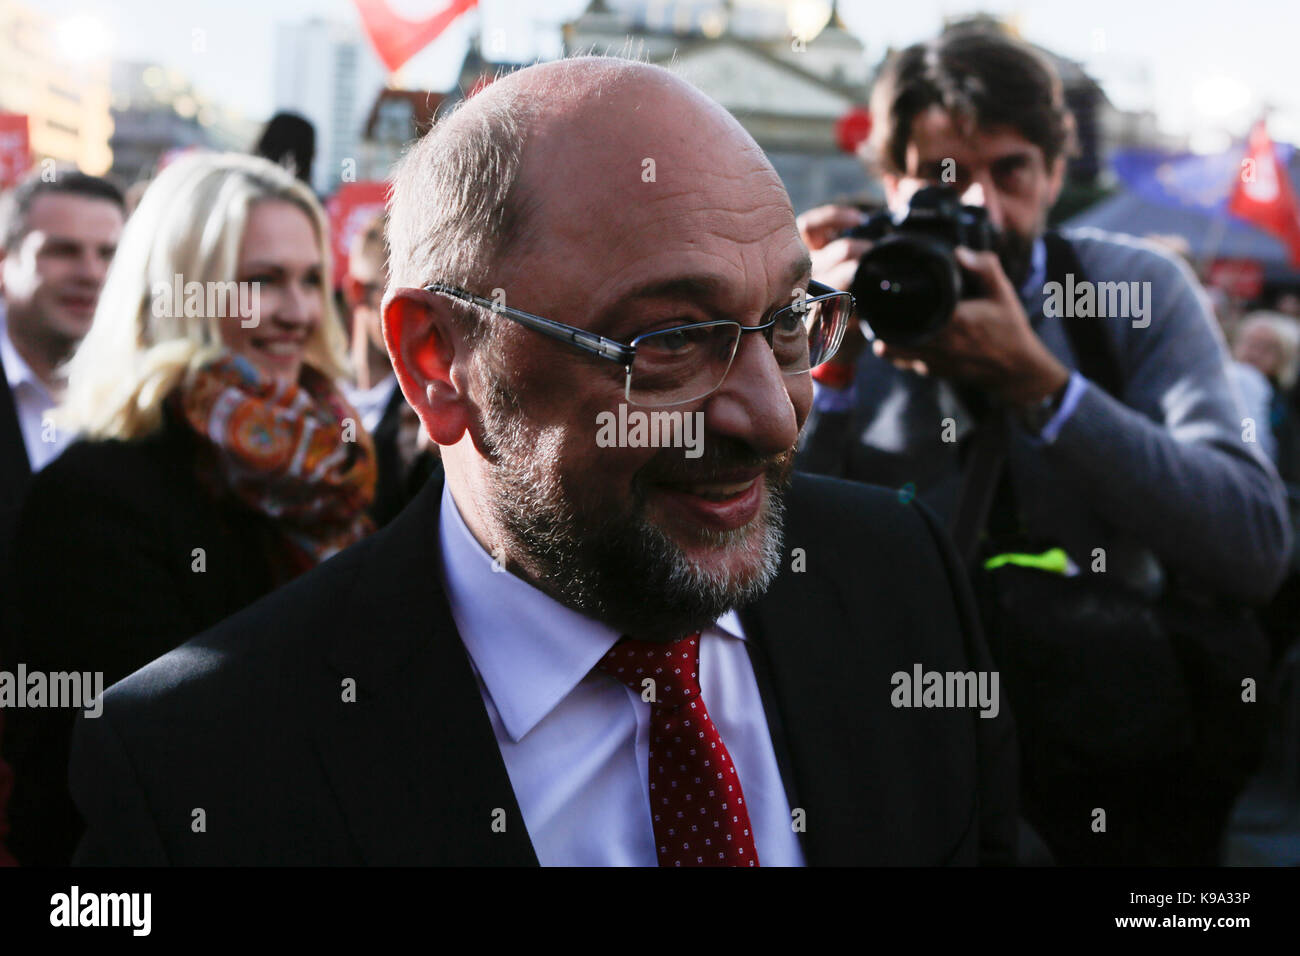 Berlin, Germany. 22nd September 2017. Martin Schulz drives at the rally. The candidate for the German Chancellorship of the SPD (Social Democratic Party of Germany) was the main speaker at a large rally in the centre of Berlin, two days ahead of the German General Election. Stock Photo